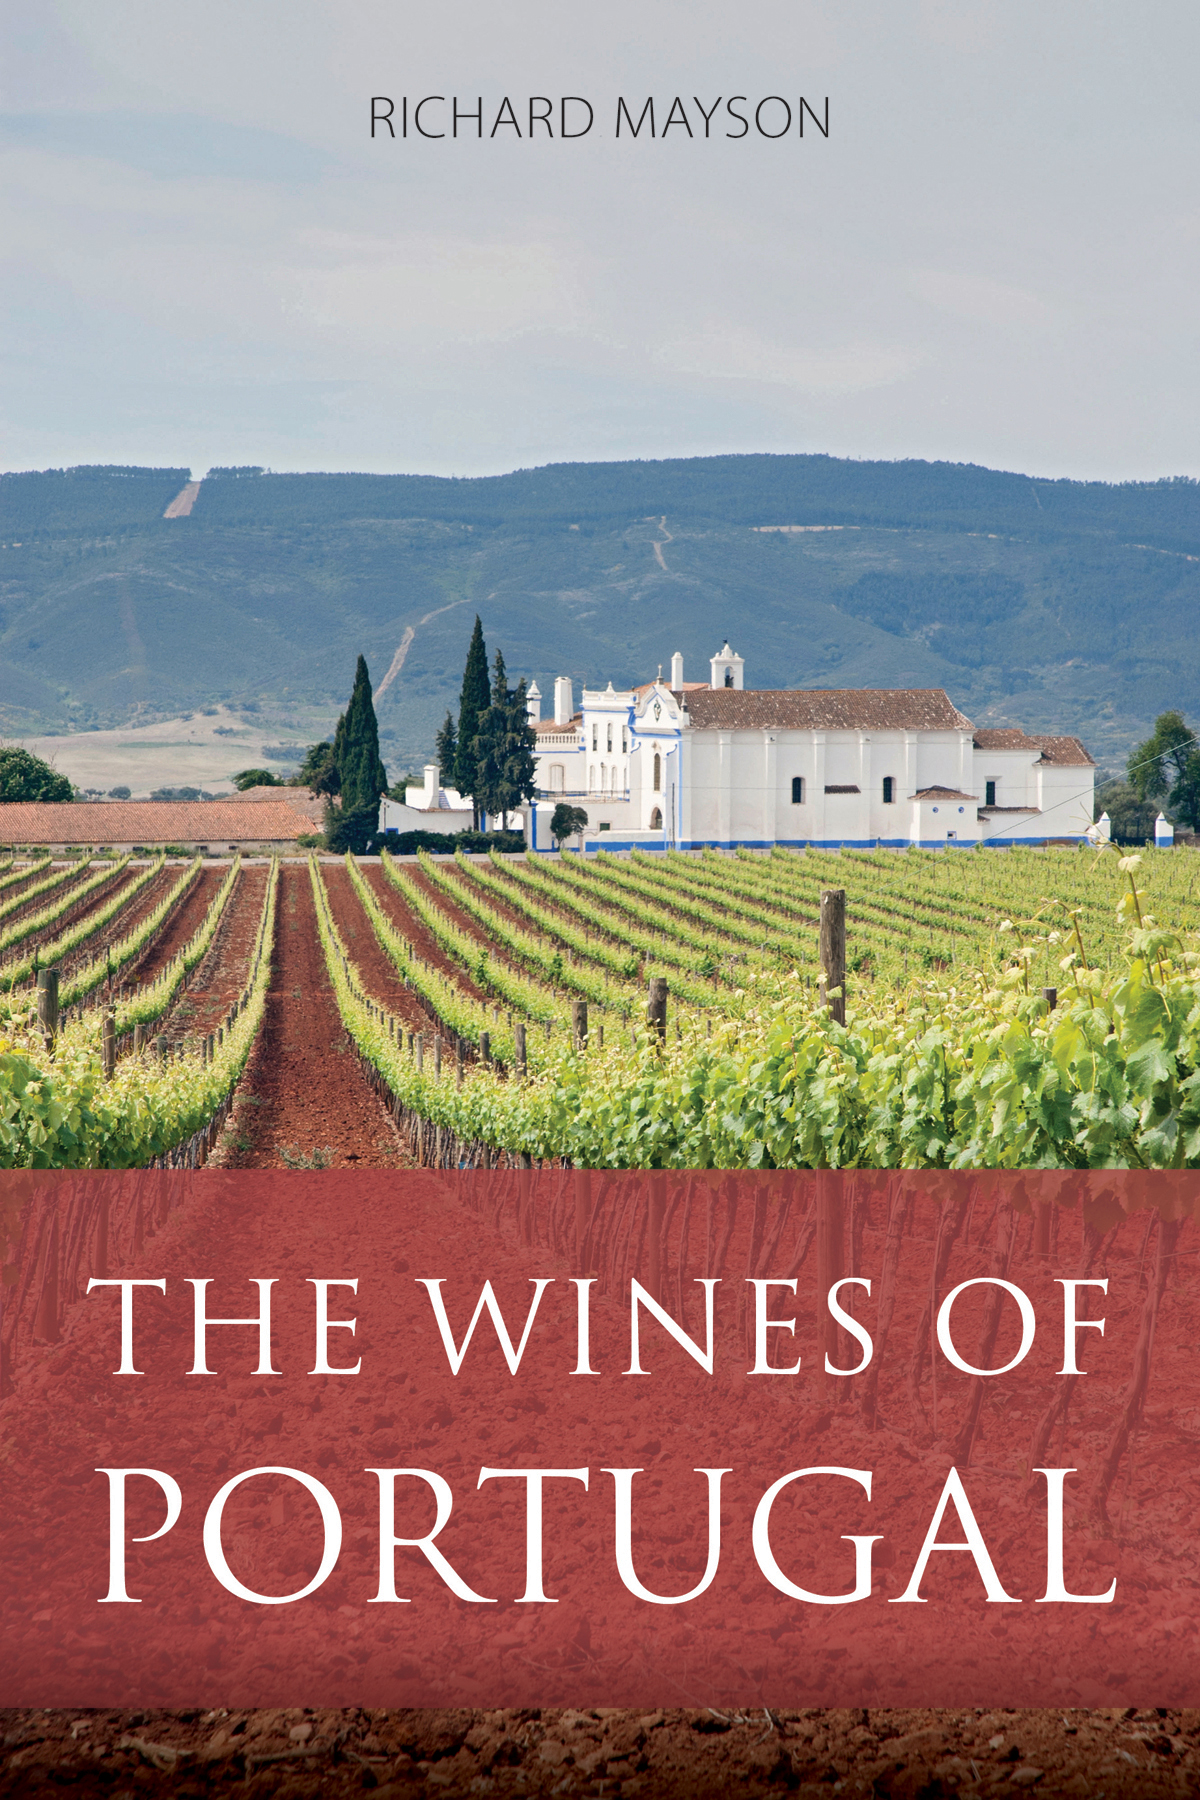 Extract: The wines of Portugal by Richard Mayson